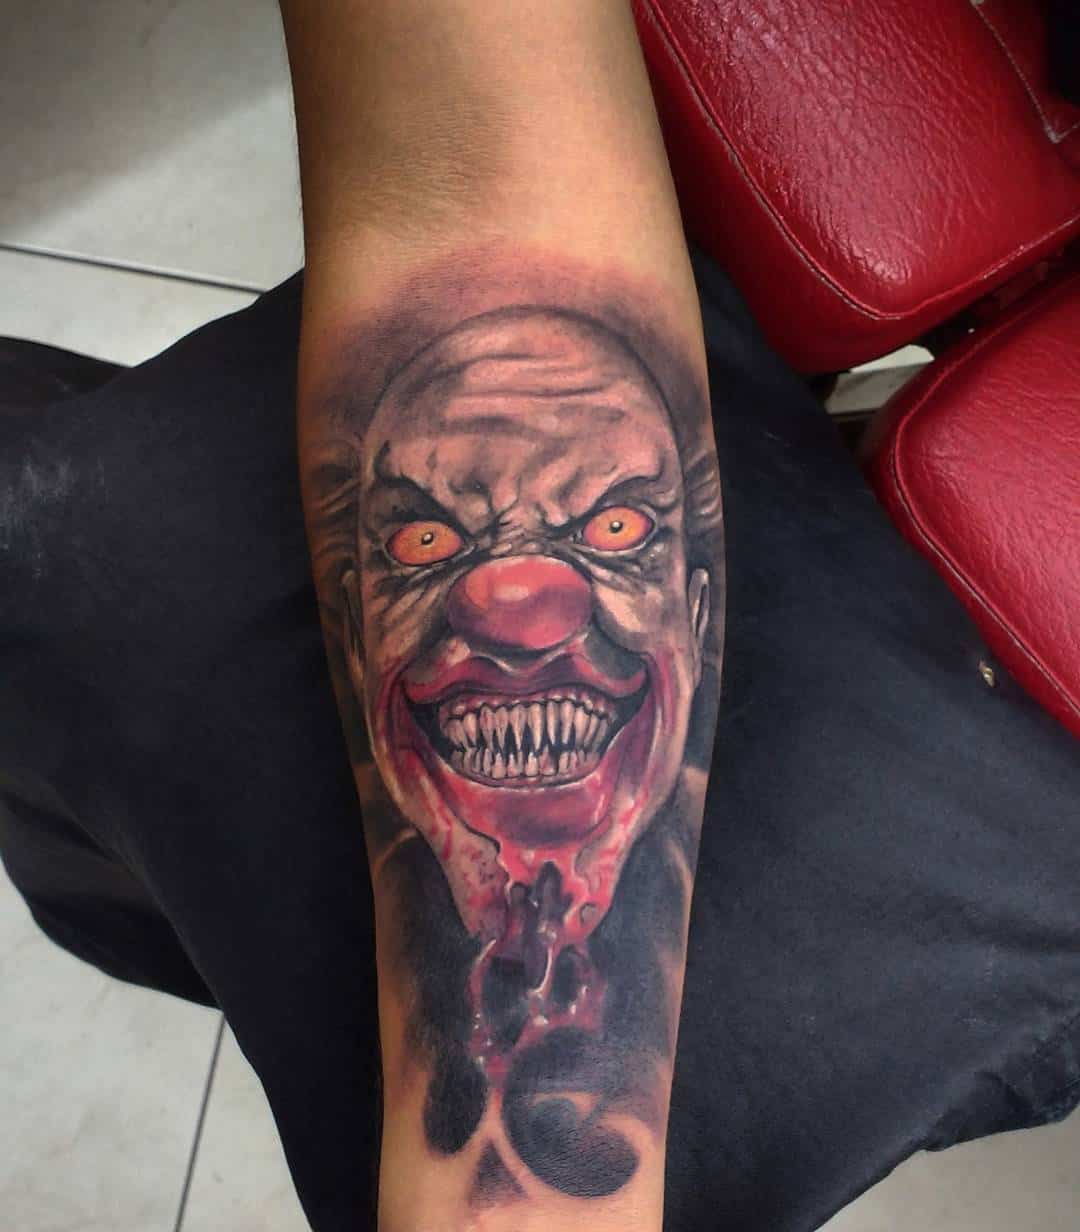 Evil Clown Tattoos Explained: Origins, Meanings & More